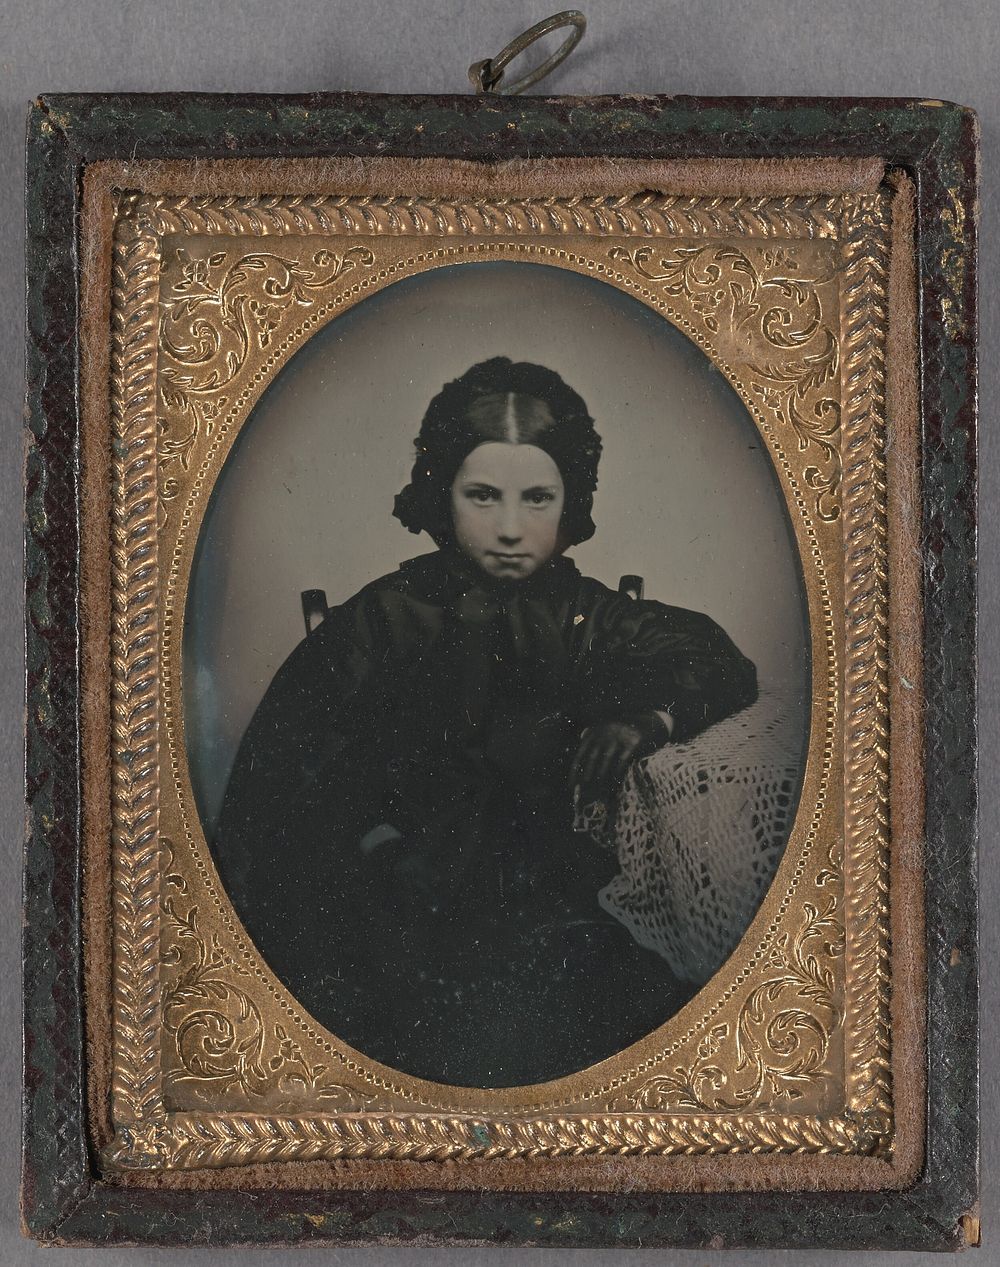 Portrait of a young girl dressed in dark clothes, wearing dark gloves